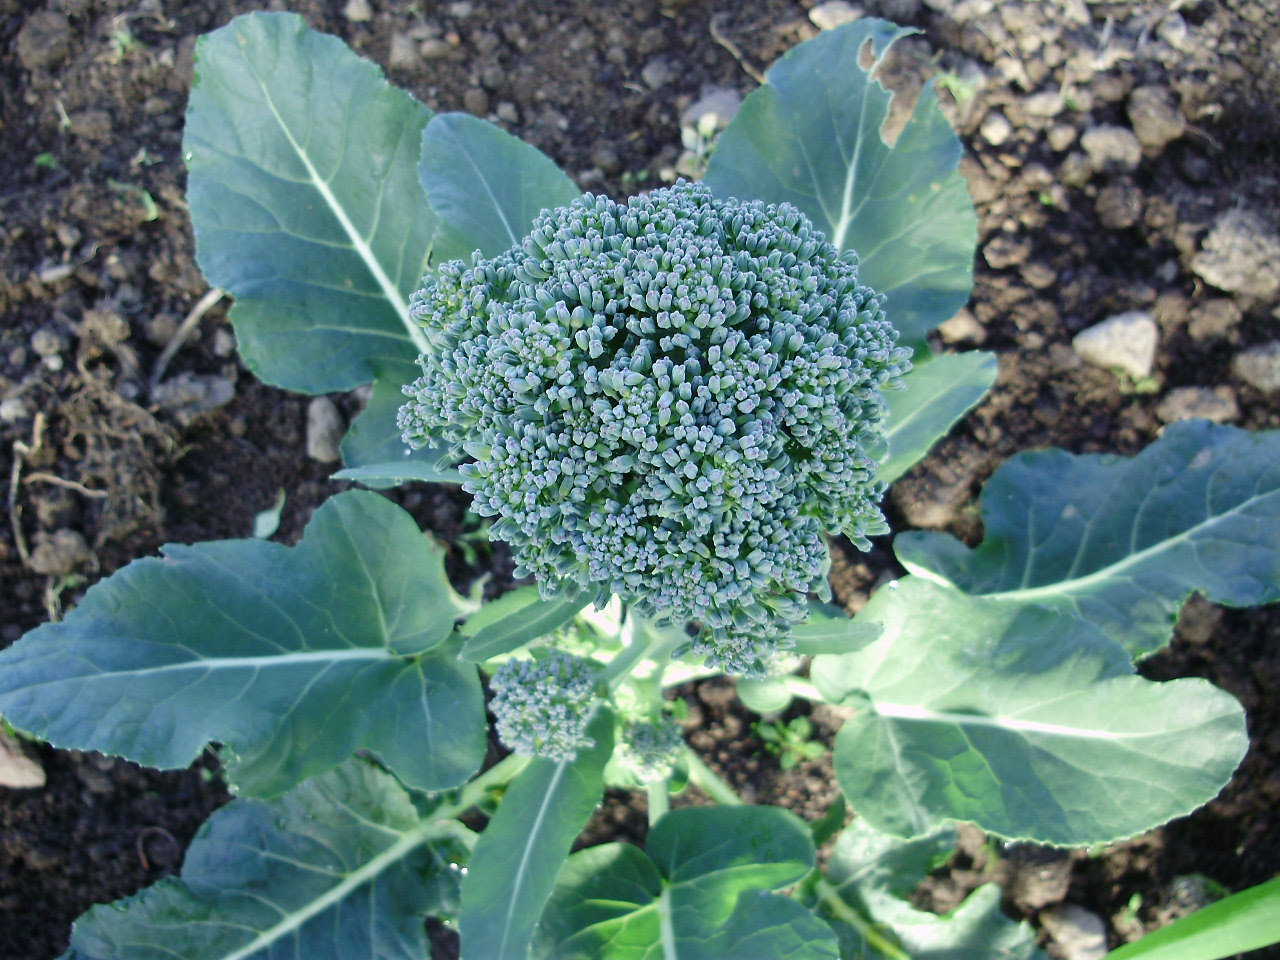 Calabrese broccoli 'Green Magic' - central head ready for cutting